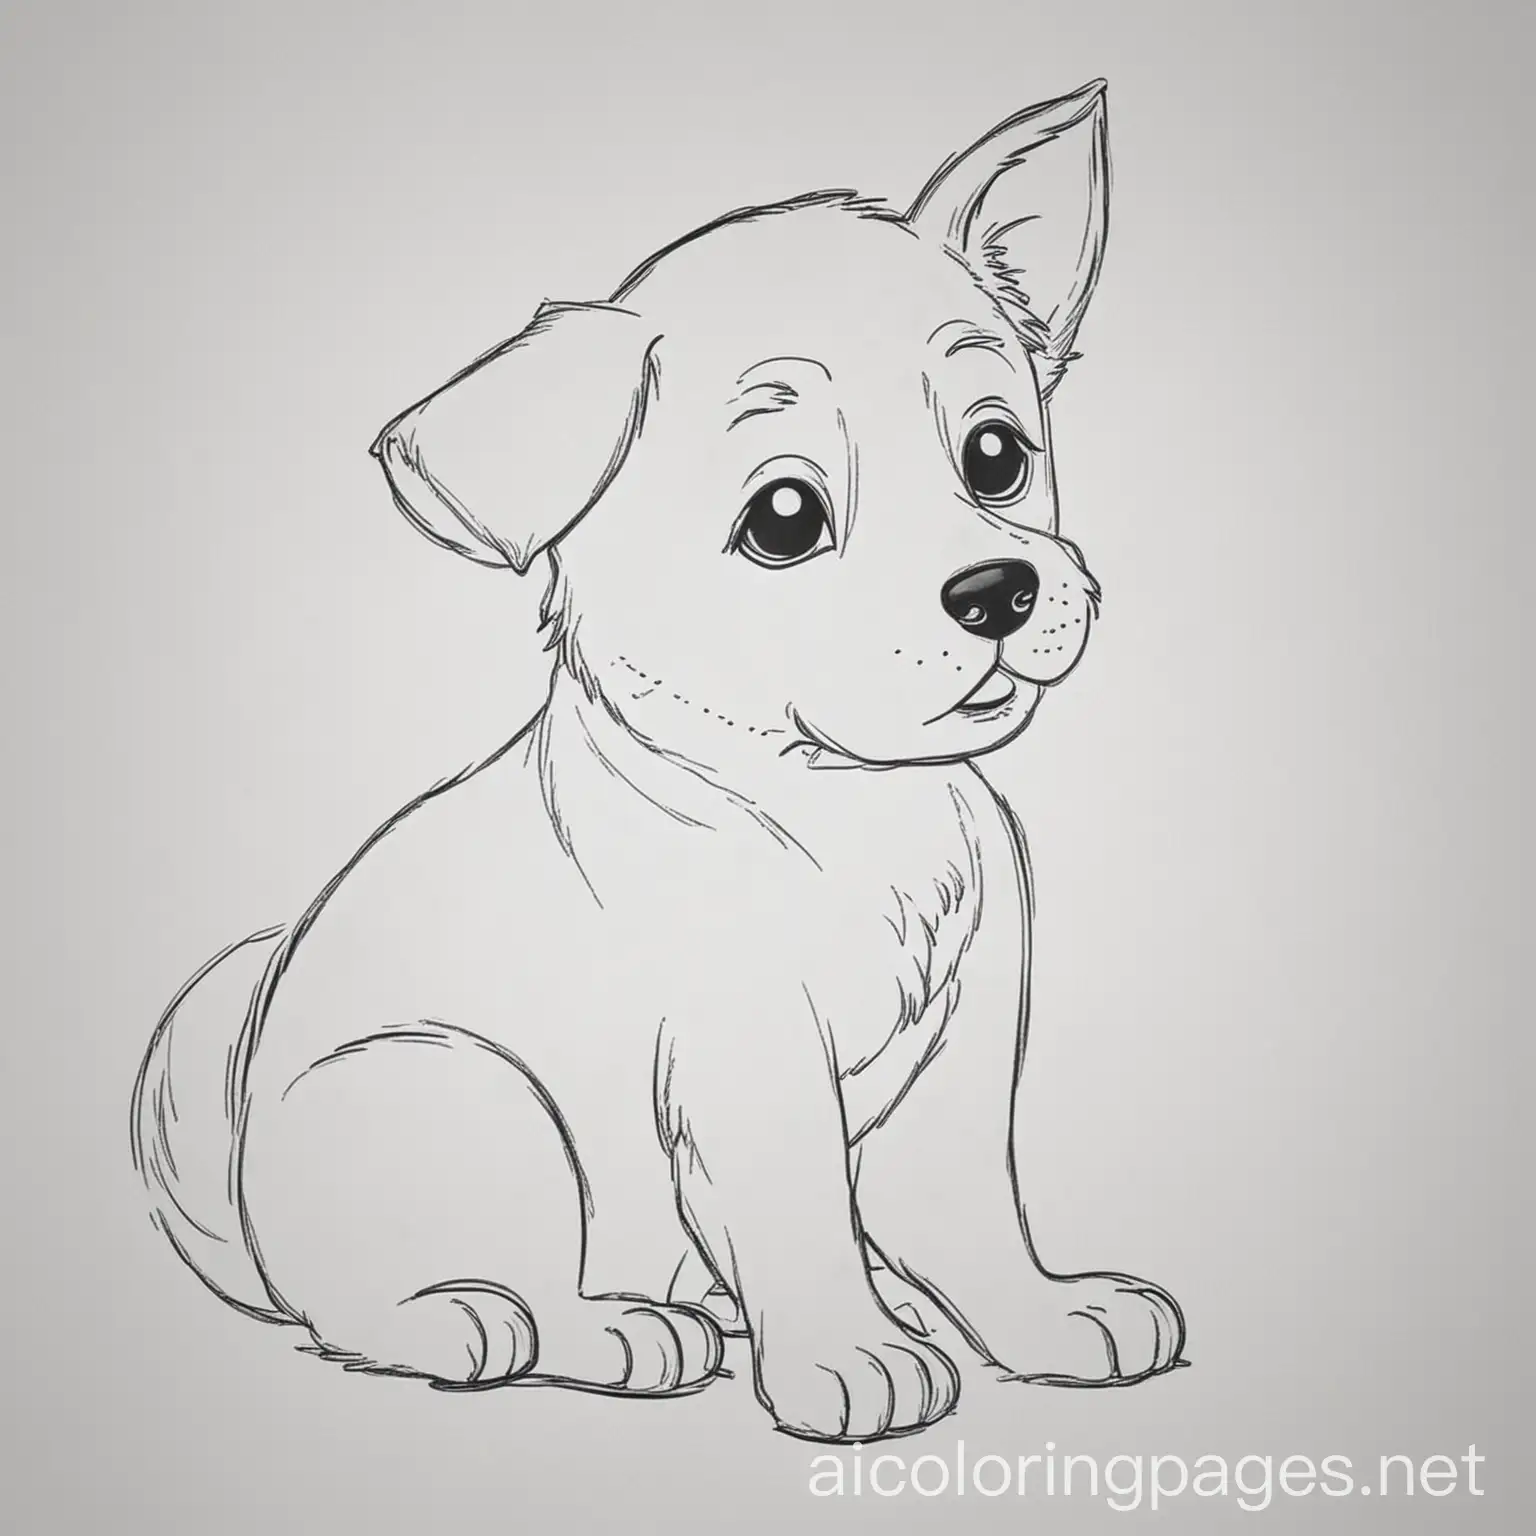 dog , Coloring Page, black and white, line art, white background, Simplicity, Ample White Space. The background of the coloring page is plain white to make it easy for young children to color within the lines. The outlines of all the subjects are easy to distinguish, making it simple for kids to color without too much difficulty